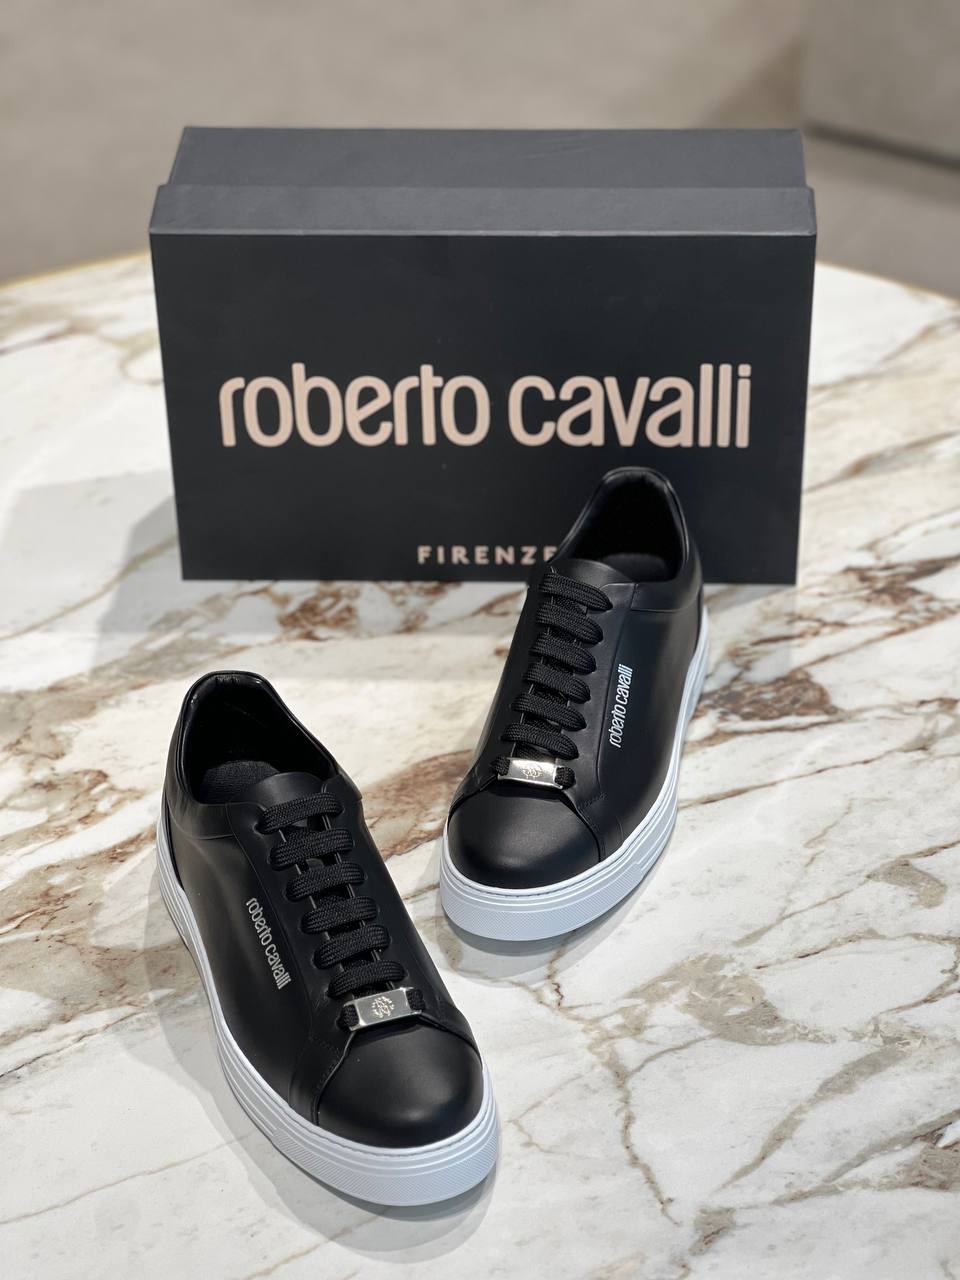 Roberto Cavalli Outlets 5954